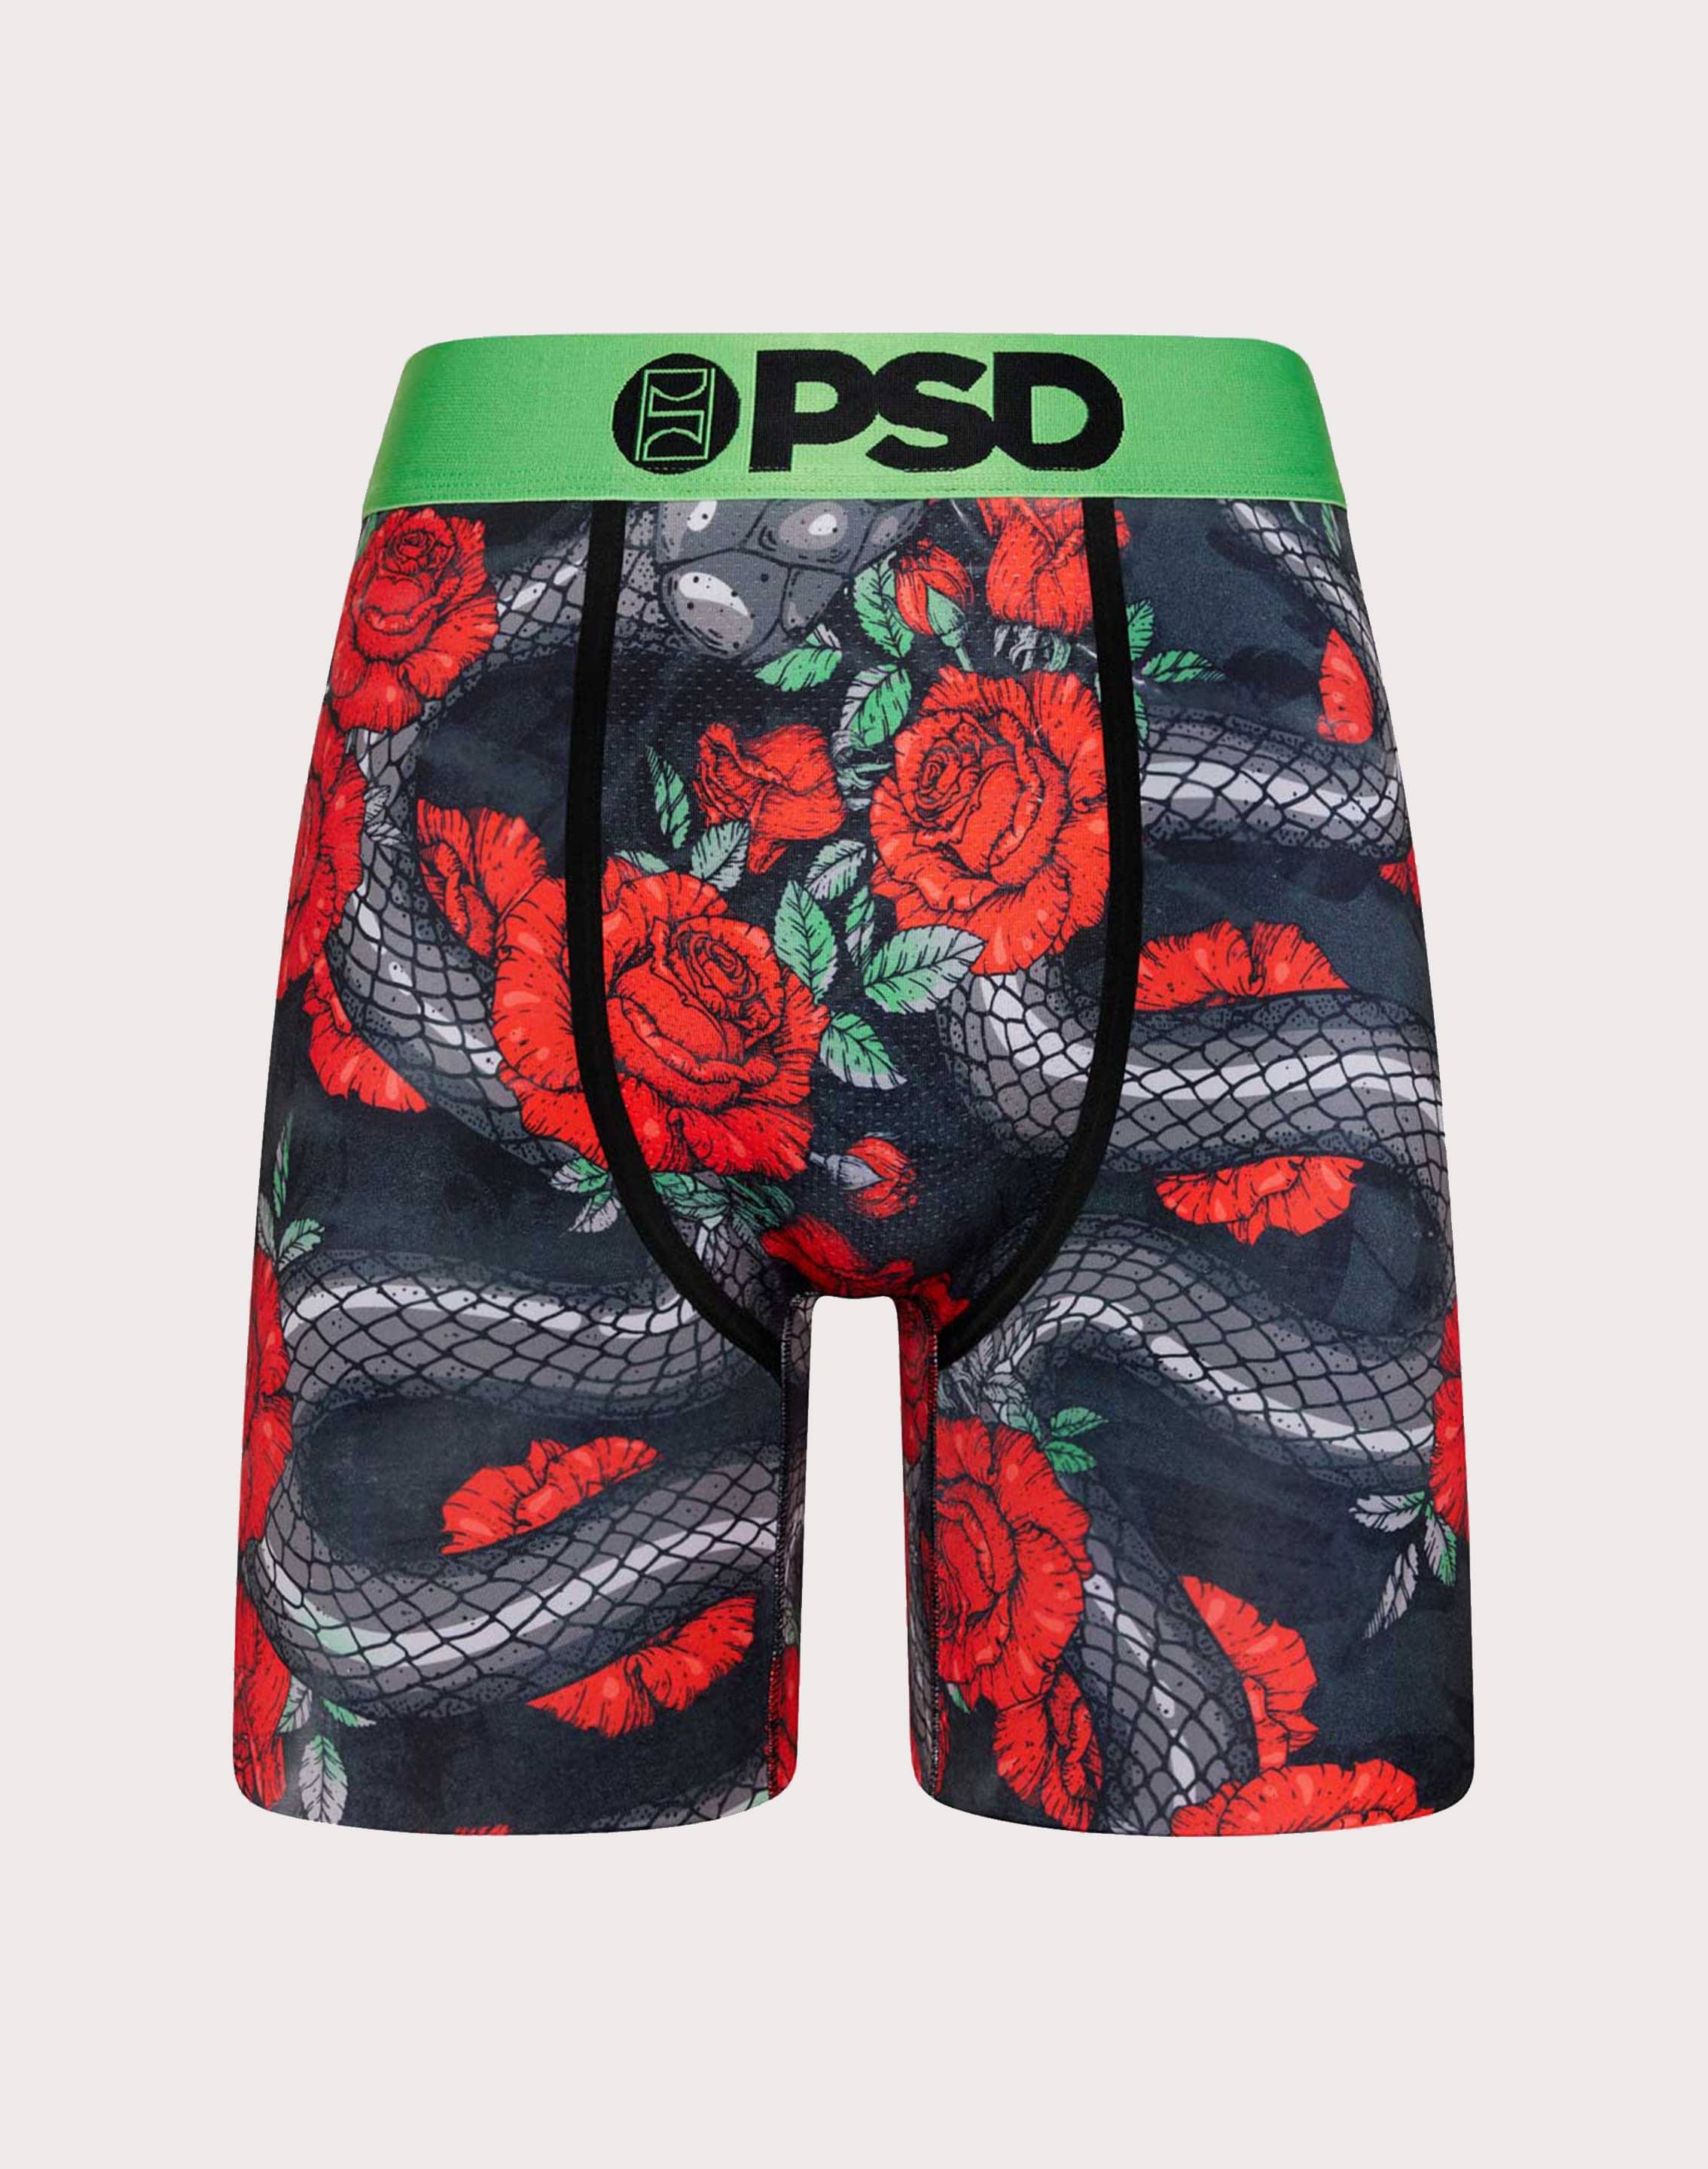 Marshawn Lynch's BEASTMODE® Expands Into Underwear With PSD